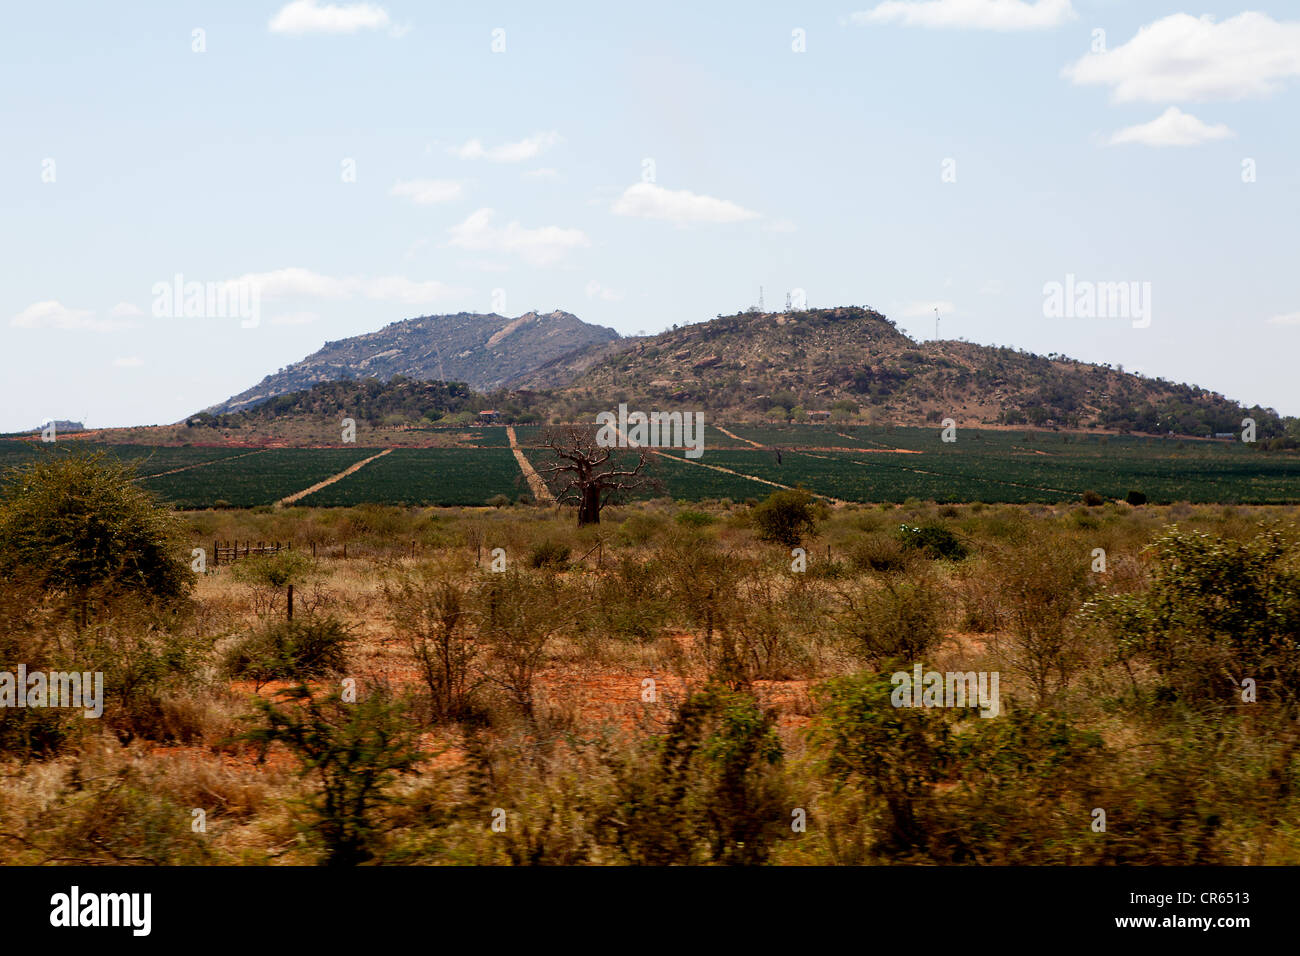 African landscape; Kenya agriculture, trees and mountain Stock Photo